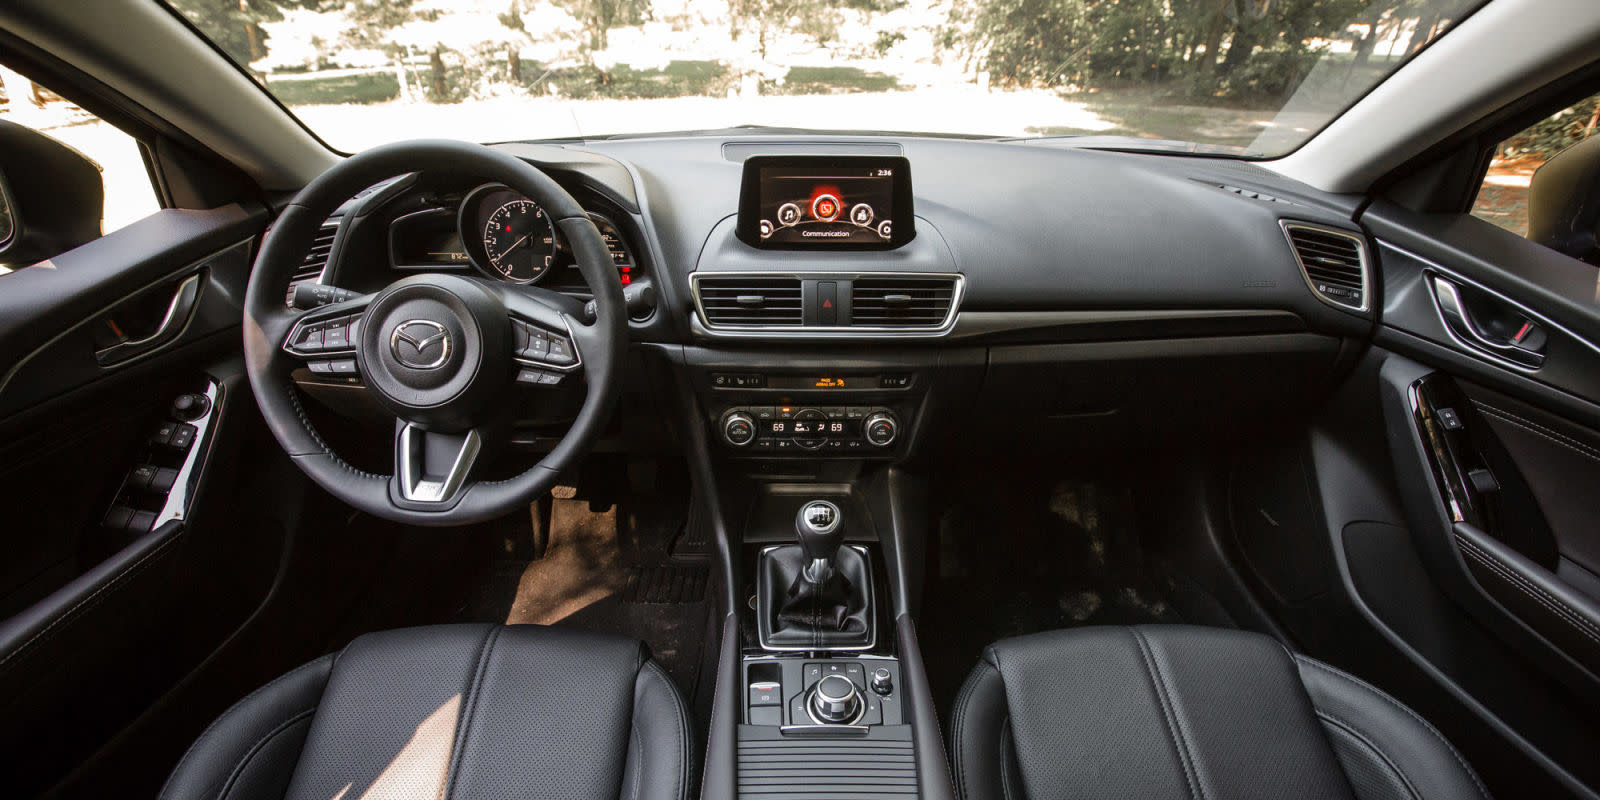 The Best Car Interior Available For Under 30 000 Is In A Mazda